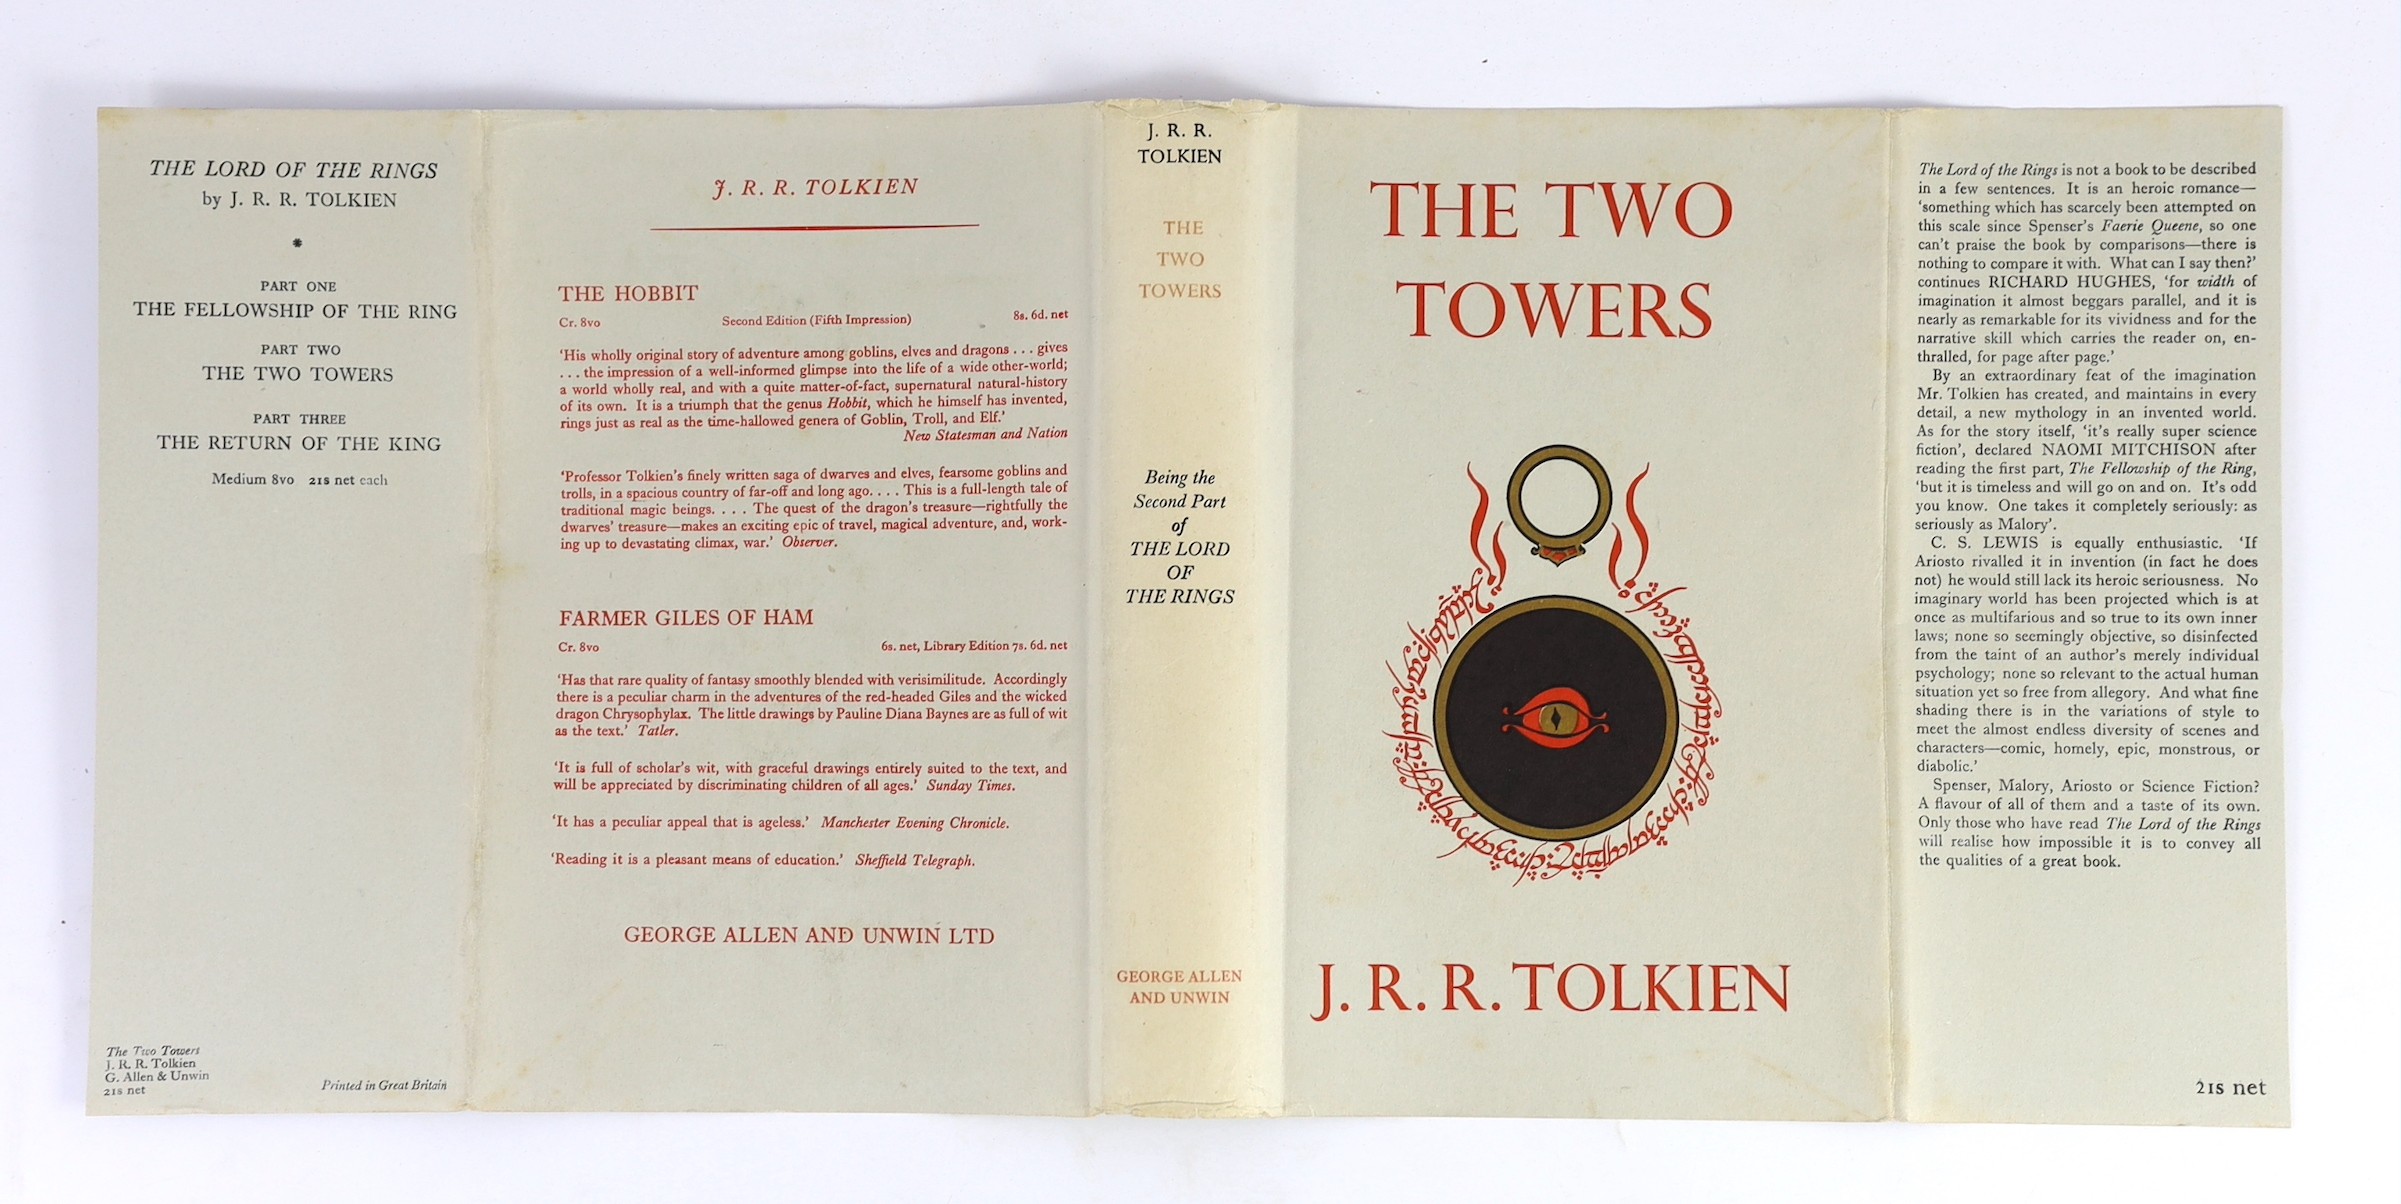 ° ° Tolkien, John Ronald Reuel - The Lord of the Rings, 1st editions, 1st impressions of Towers - Image 8 of 19